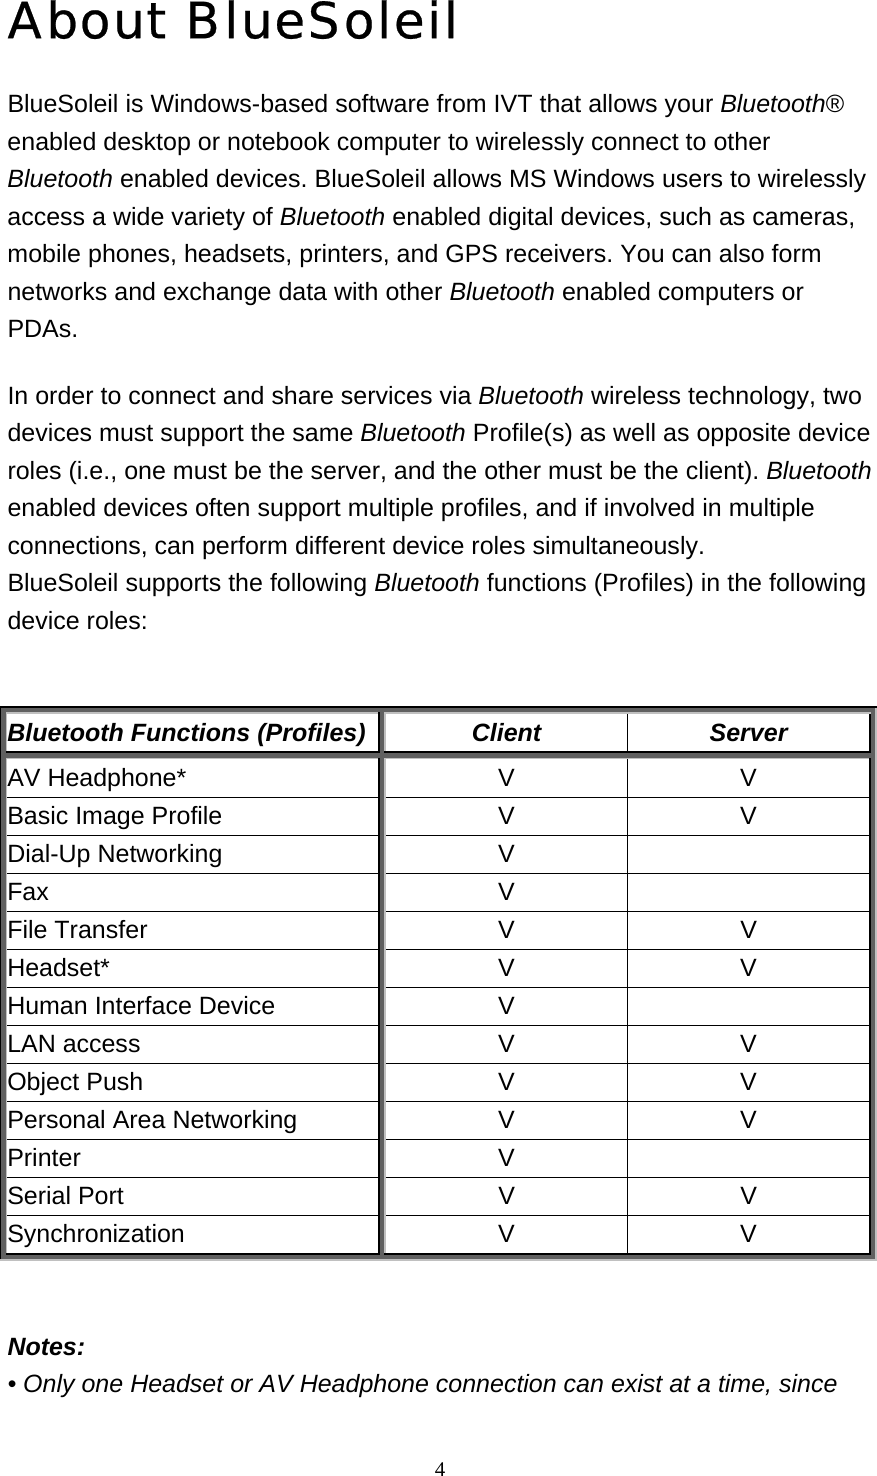   4About BlueSoleil BlueSoleil is Windows-based software from IVT that allows your Bluetooth® enabled desktop or notebook computer to wirelessly connect to other Bluetooth enabled devices. BlueSoleil allows MS Windows users to wirelessly access a wide variety of Bluetooth enabled digital devices, such as cameras, mobile phones, headsets, printers, and GPS receivers. You can also form networks and exchange data with other Bluetooth enabled computers or PDAs. In order to connect and share services via Bluetooth wireless technology, two devices must support the same Bluetooth Profile(s) as well as opposite device roles (i.e., one must be the server, and the other must be the client). Bluetooth enabled devices often support multiple profiles, and if involved in multiple connections, can perform different device roles simultaneously. BlueSoleil supports the following Bluetooth functions (Profiles) in the following device roles:     Bluetooth Functions (Profiles)  Client  Server AV Headphone*  V  V Basic Image Profile  V  V Dial-Up Networking  V   Fax V  File Transfer  V  V Headset* V V Human Interface Device  V   LAN access  V  V Object Push  V  V Personal Area Networking  V  V Printer V  Serial Port  V  V Synchronization V V     Notes: • Only one Headset or AV Headphone connection can exist at a time, since 